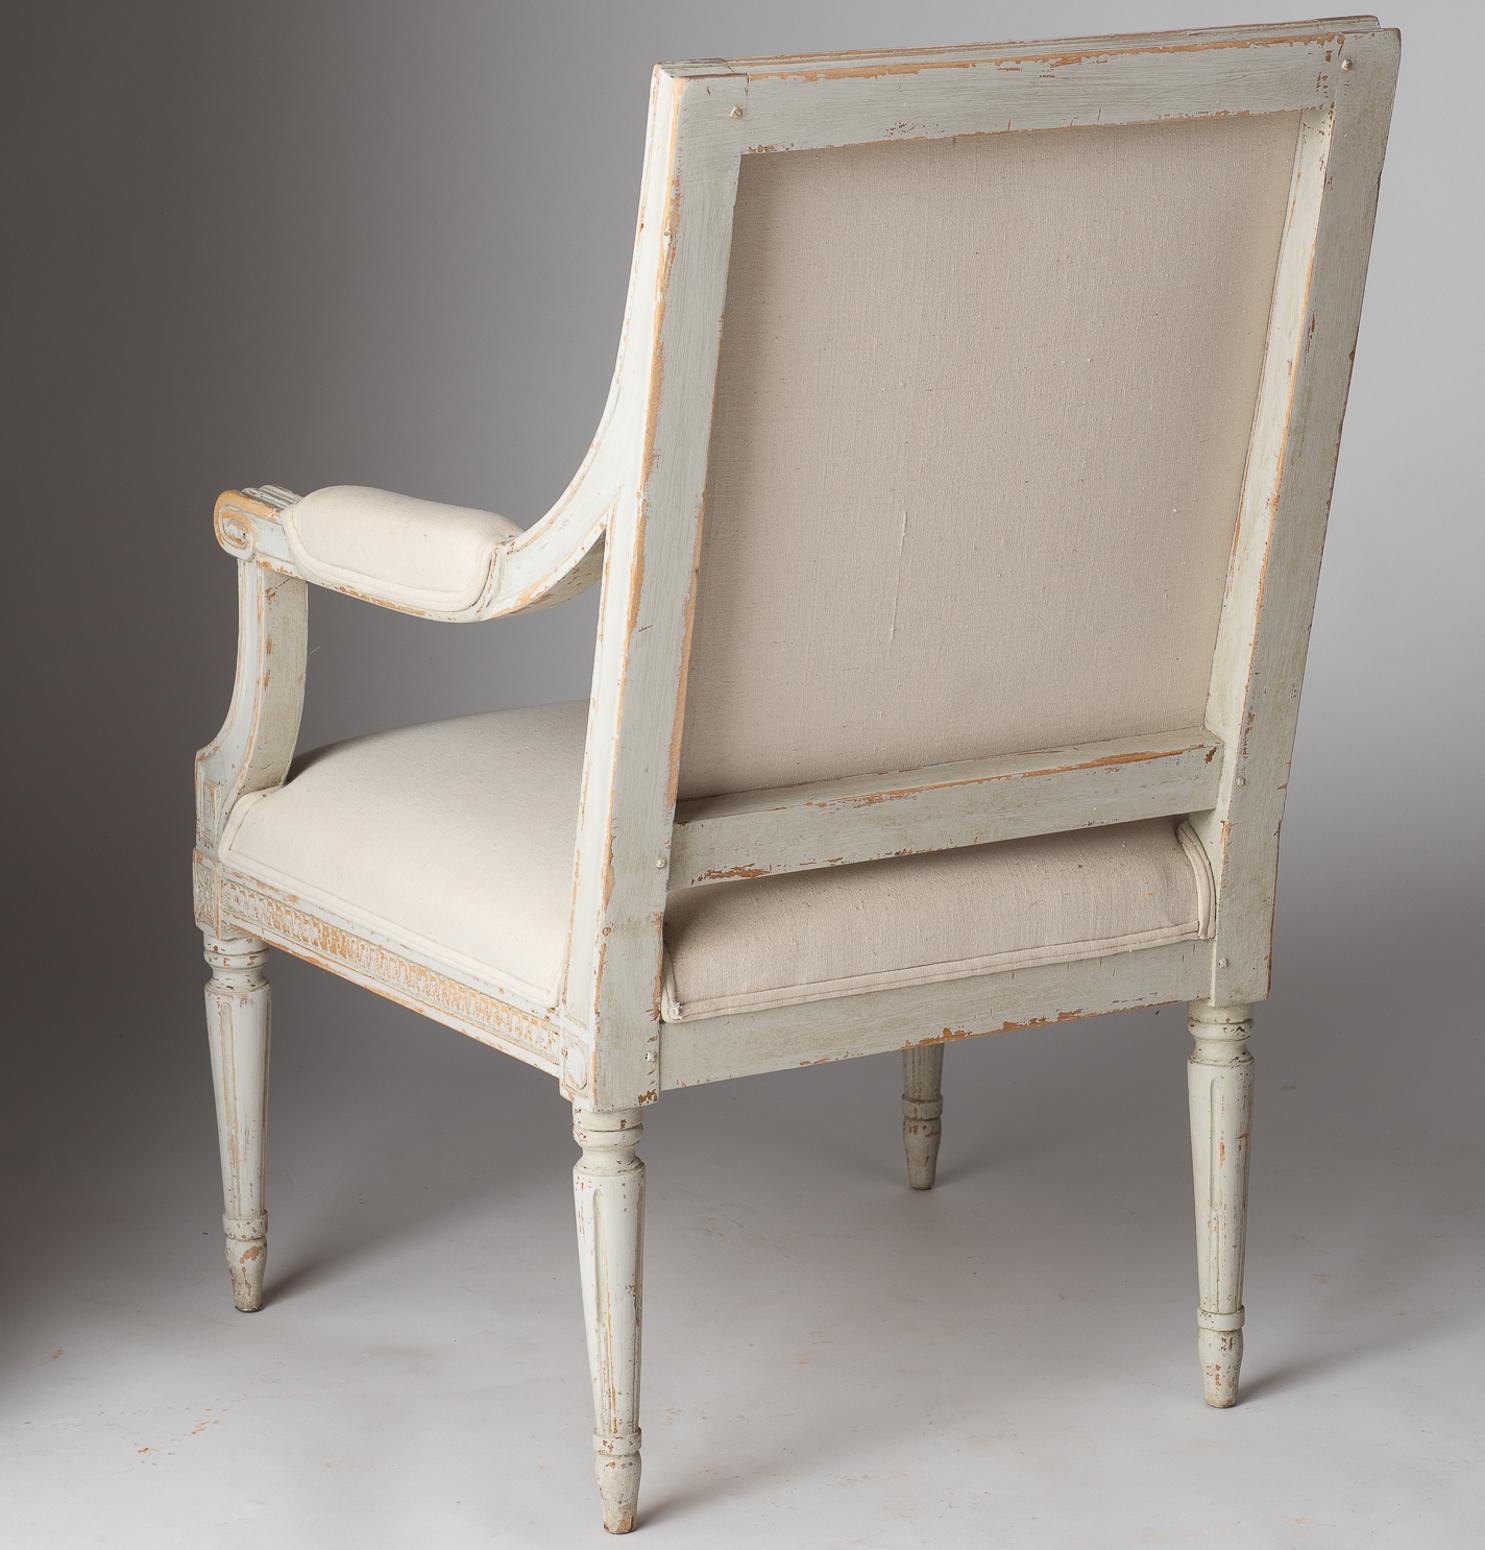 19th Century Pair of Swedish Late Gustavian Period Stockholm Armchairs, circa 1800 For Sale